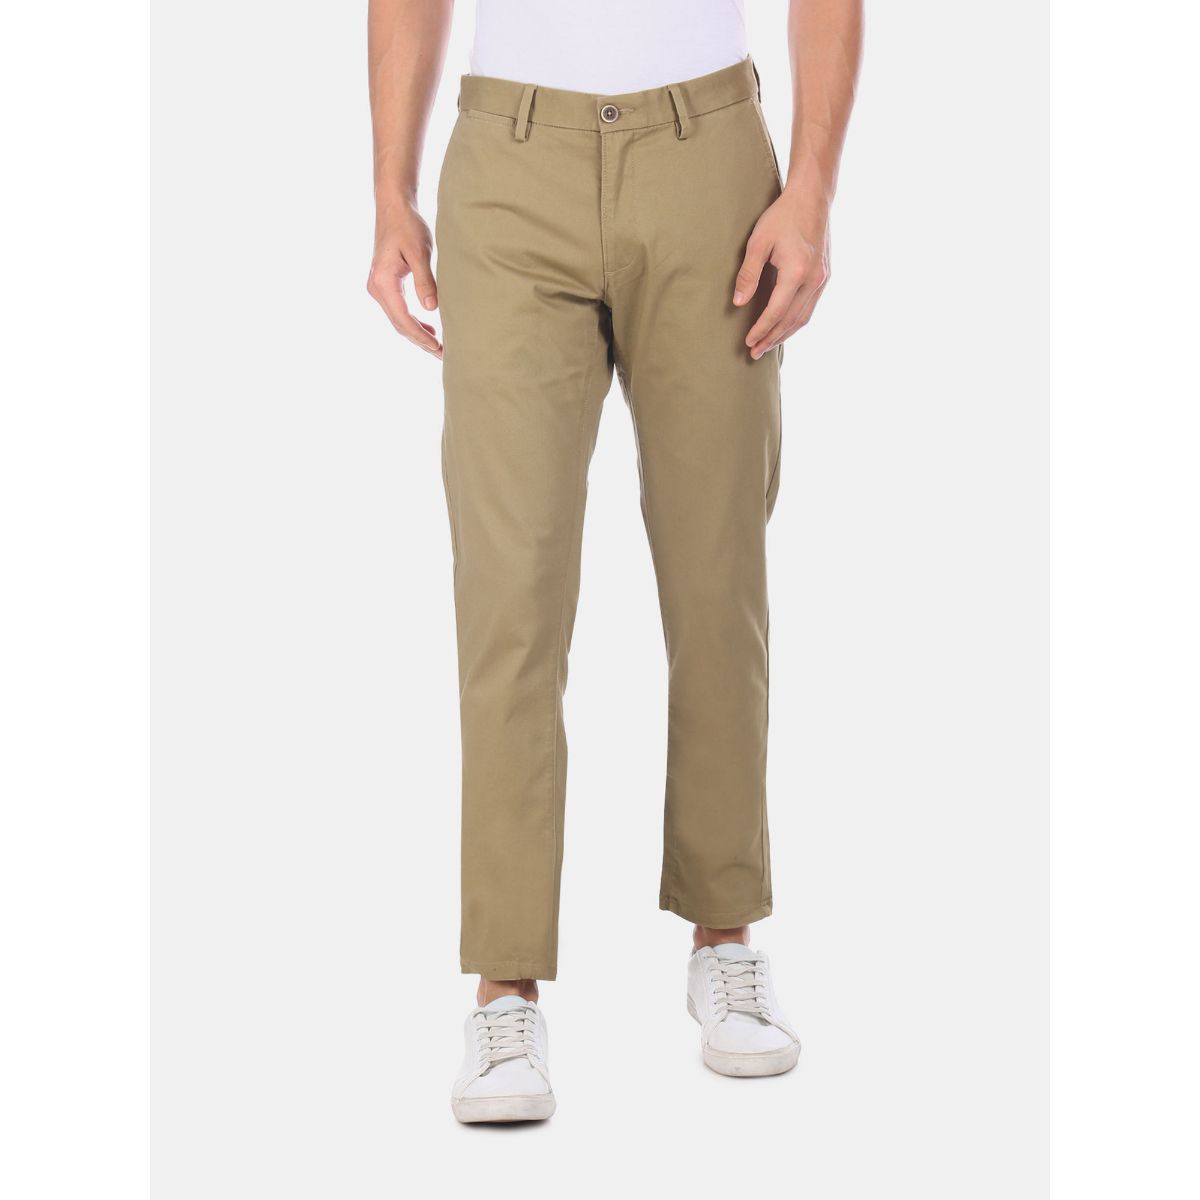 Us Polo Assn Trousers  Buy Latest Us Polo Assn Trousers Online  Myntra